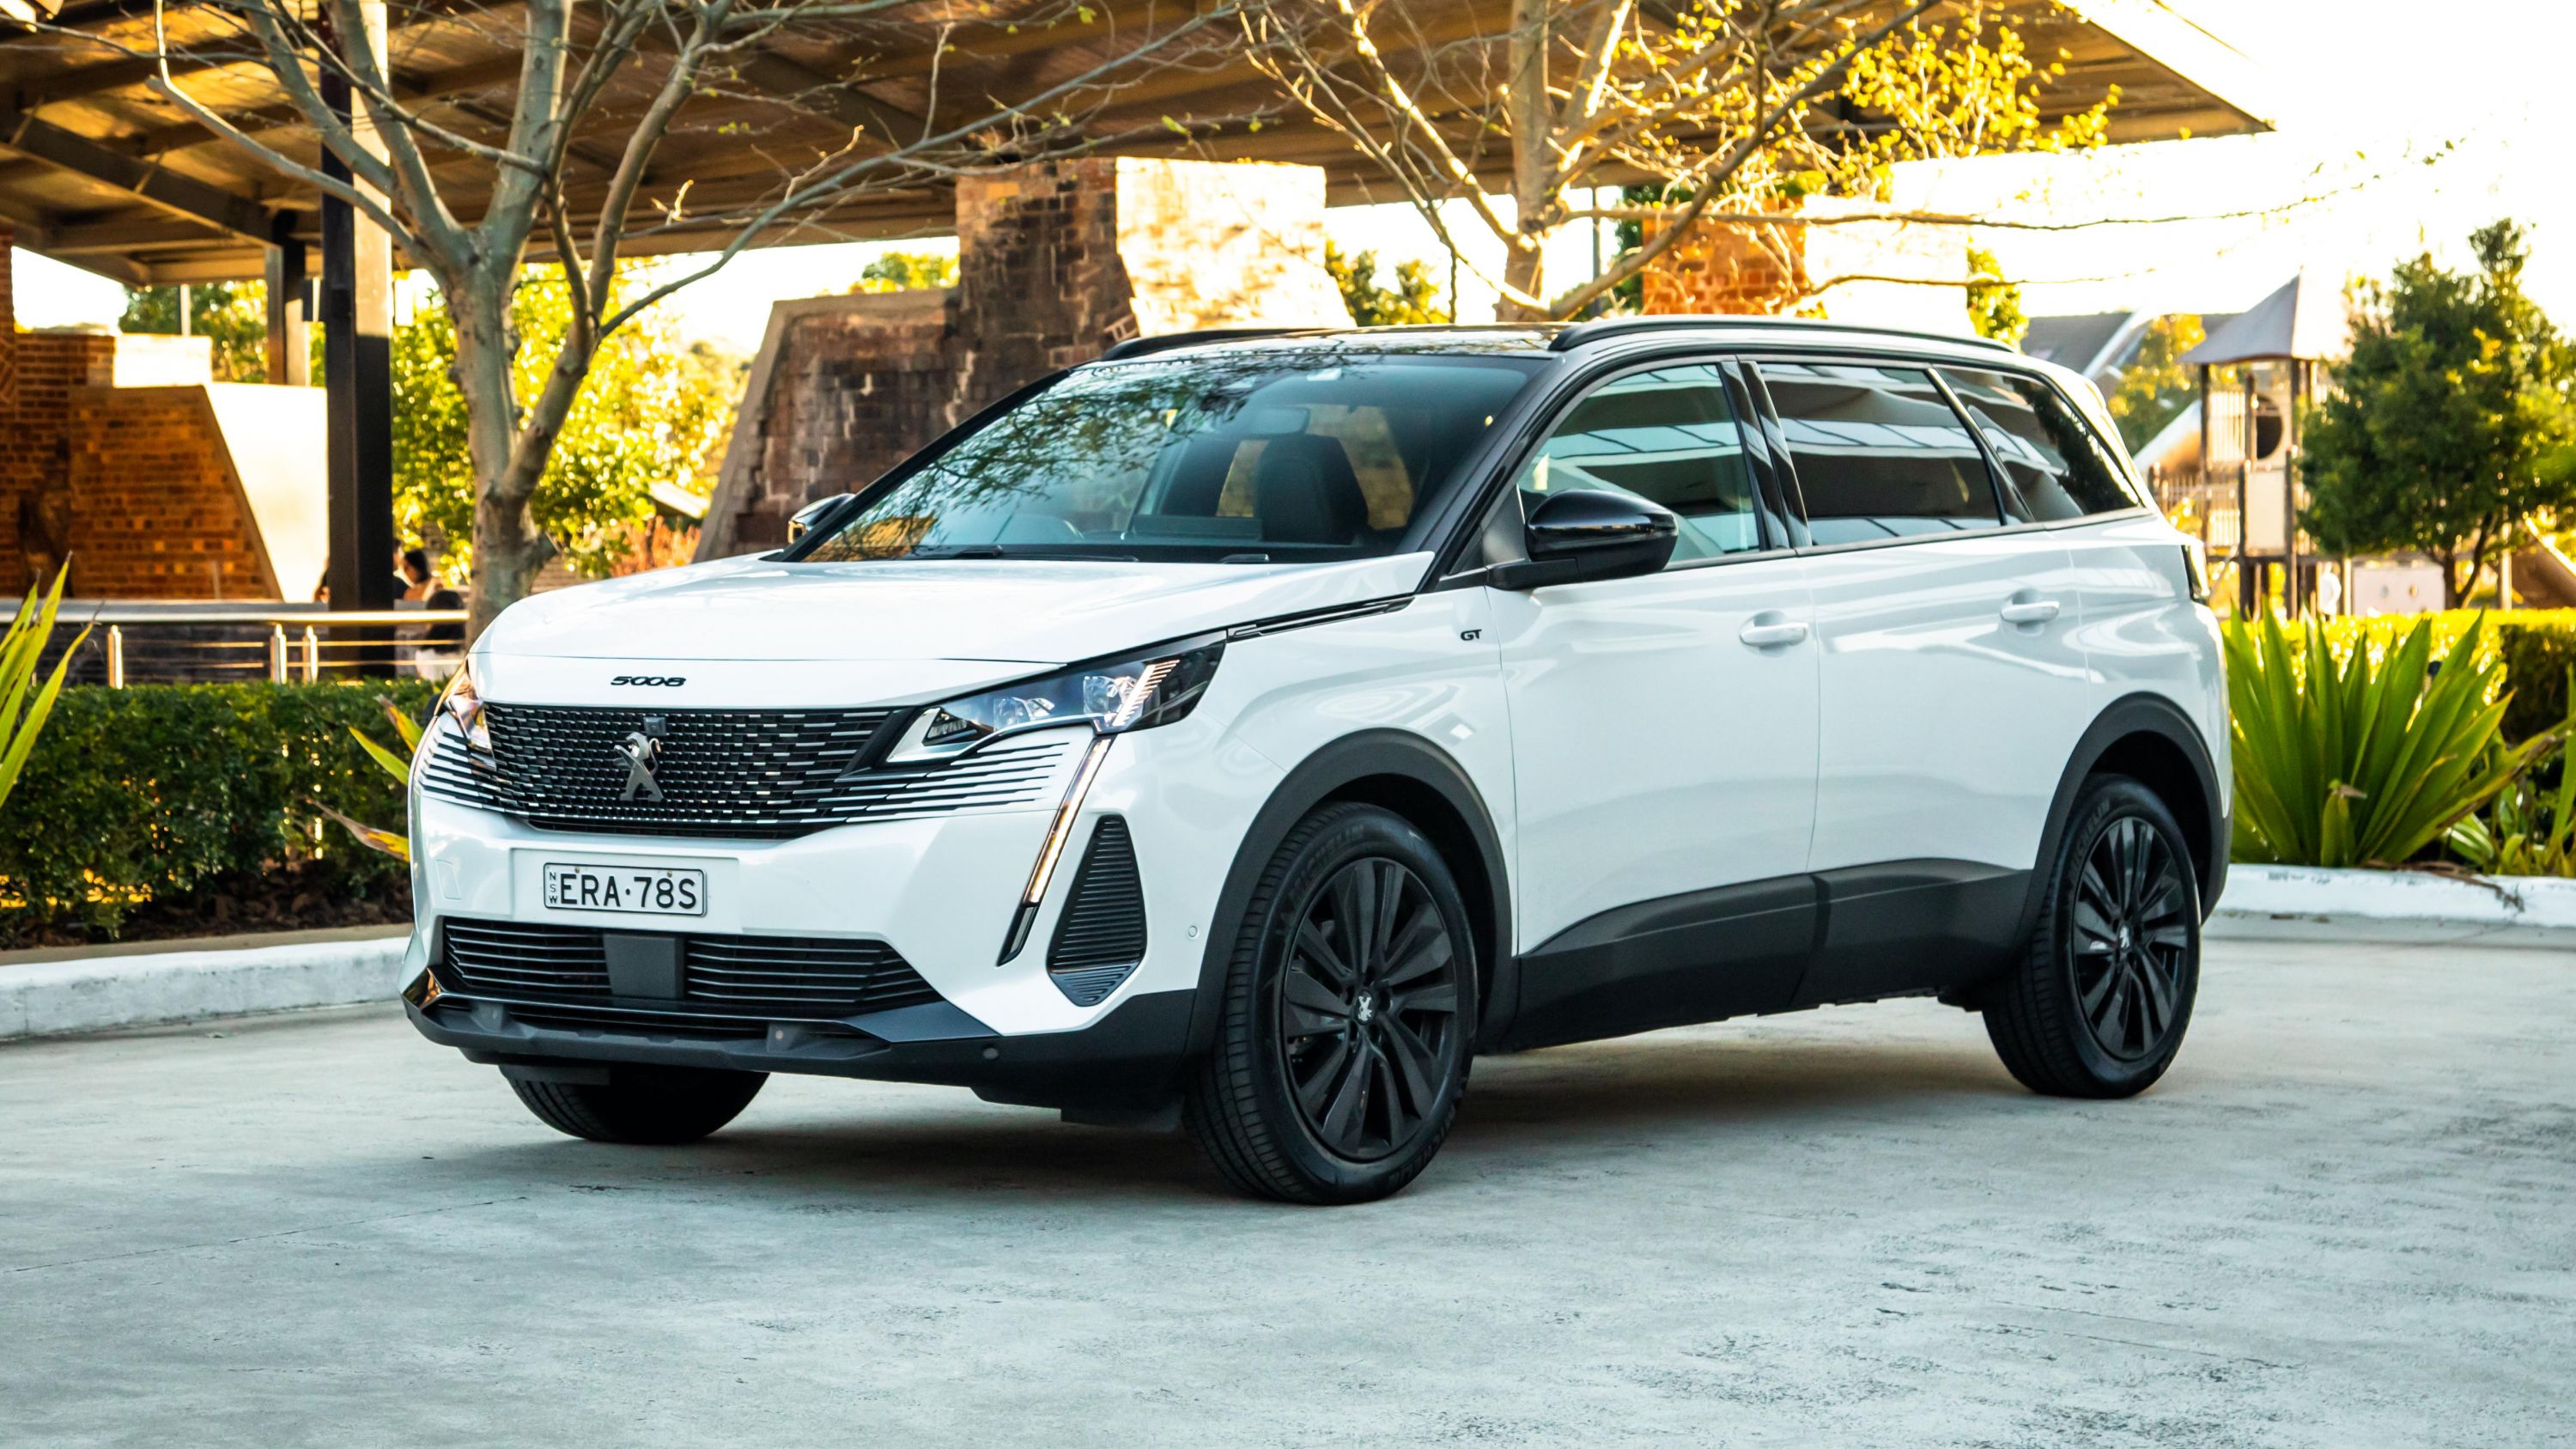 New 2023 Peugeot 5008 to gain a range of pure-electric powertrains